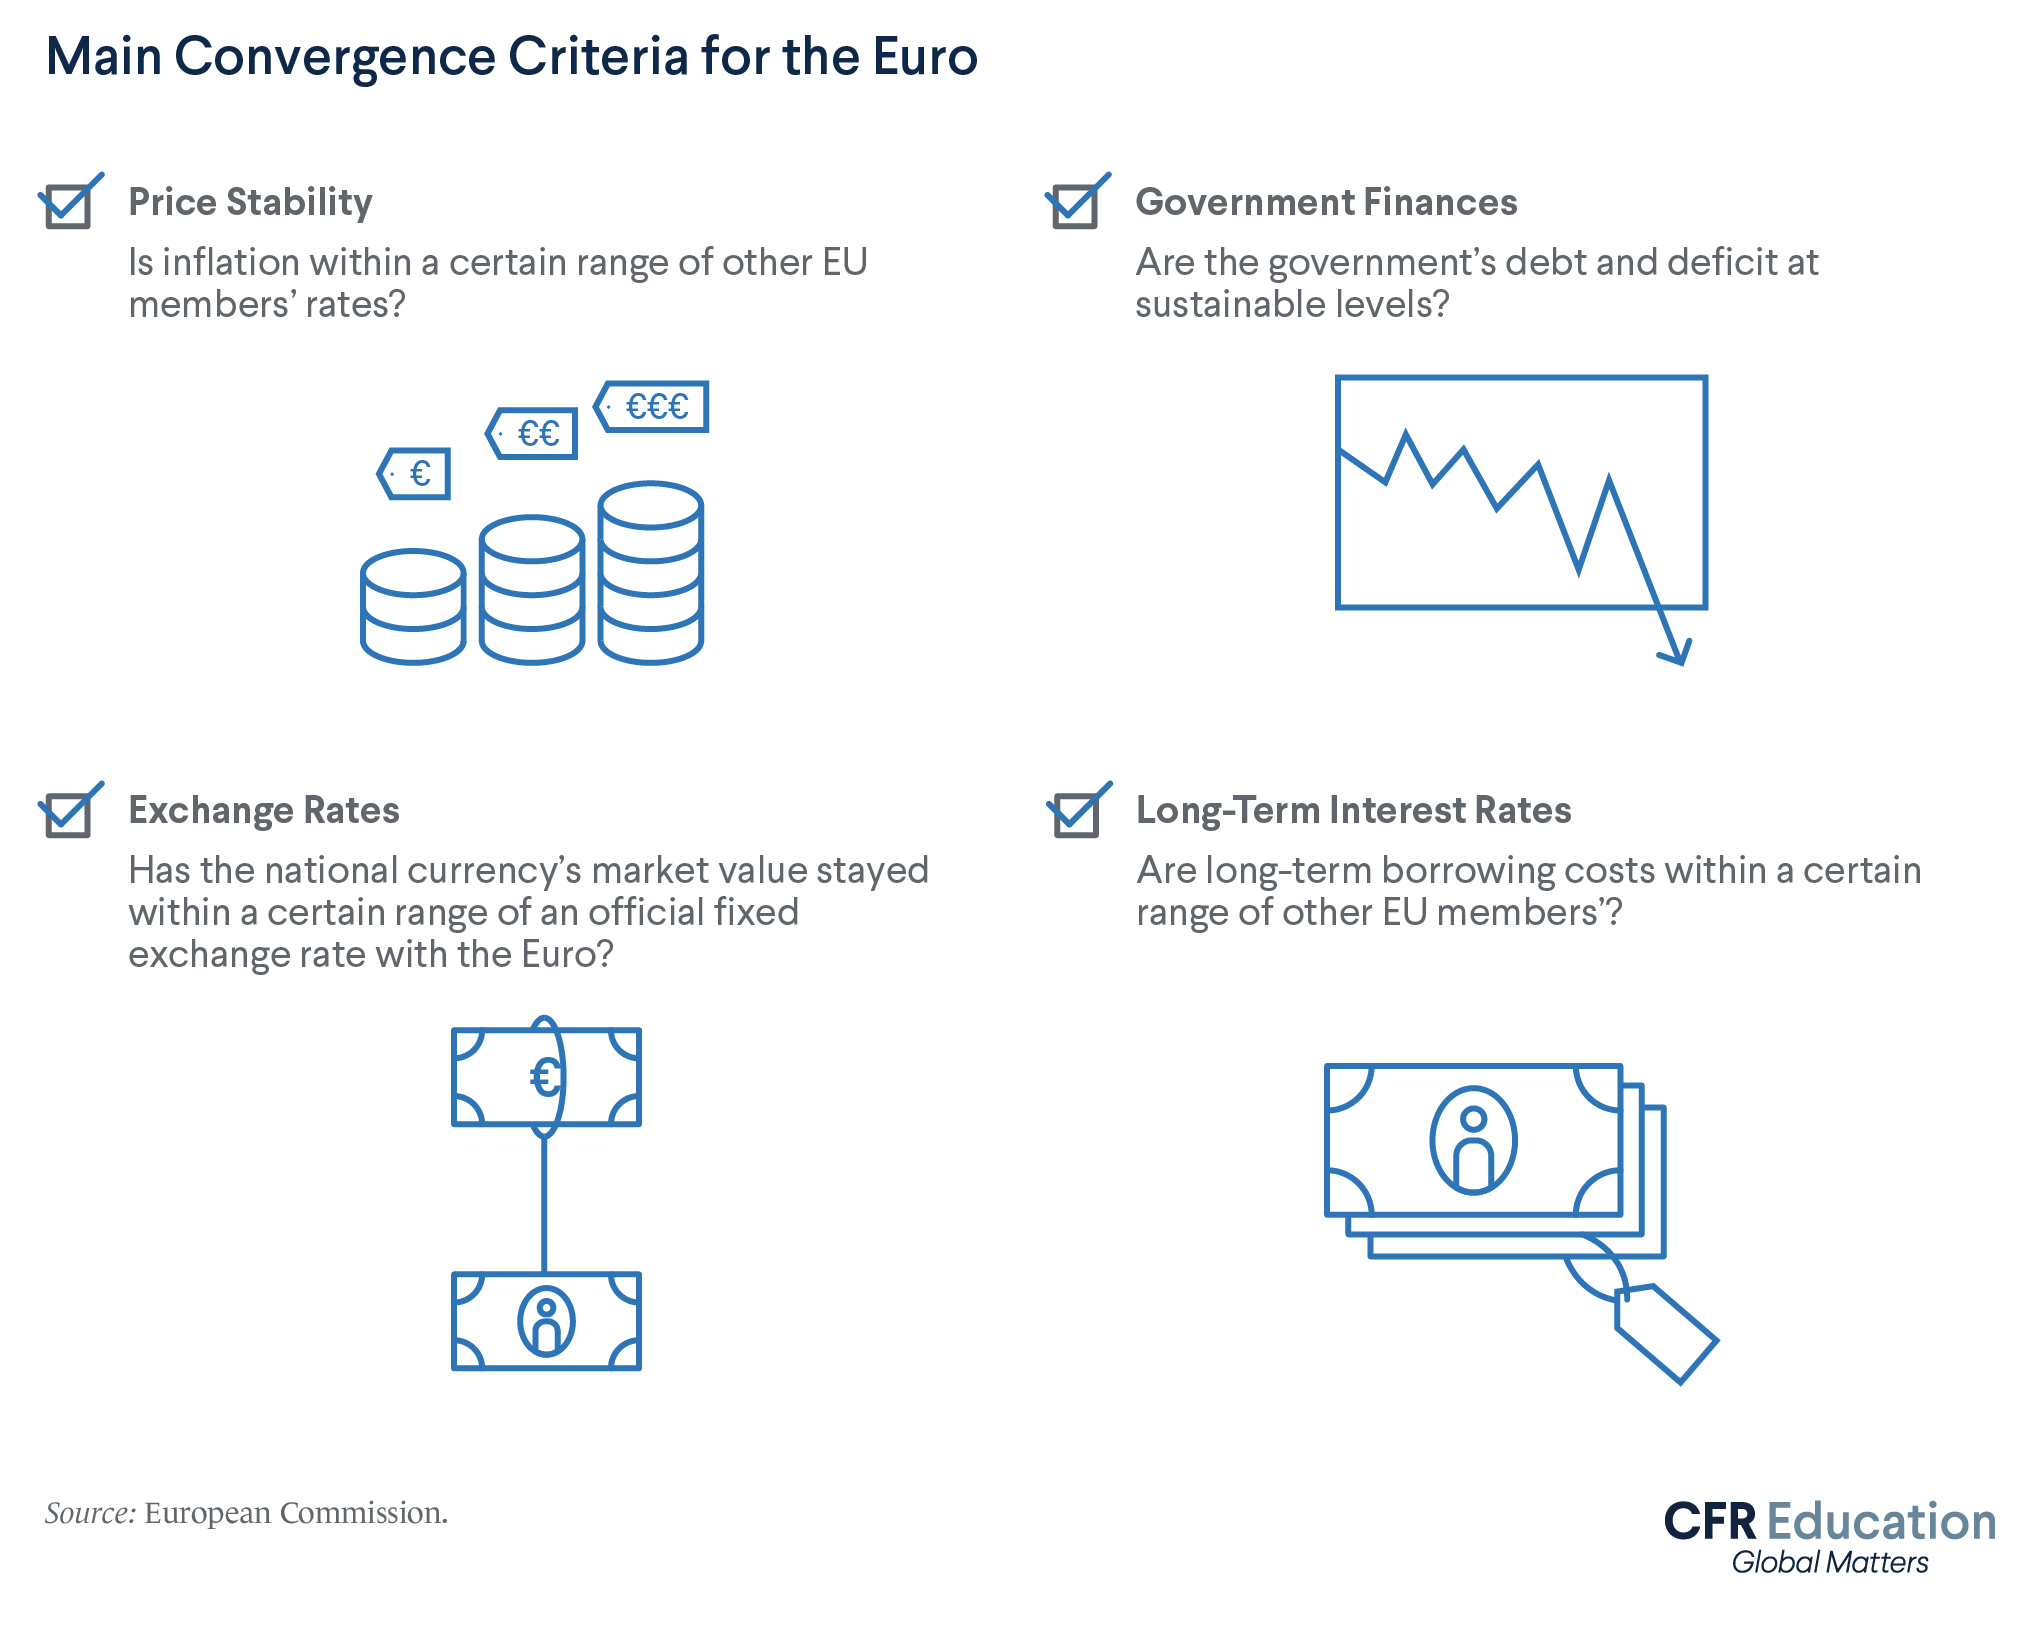 An infographic depicting the four convergence criteria for the euro: price stability, government finances, exchange rates, and long-term interest rates. Source: European Commission. For more info contact us at cfr_education@cfr.org.